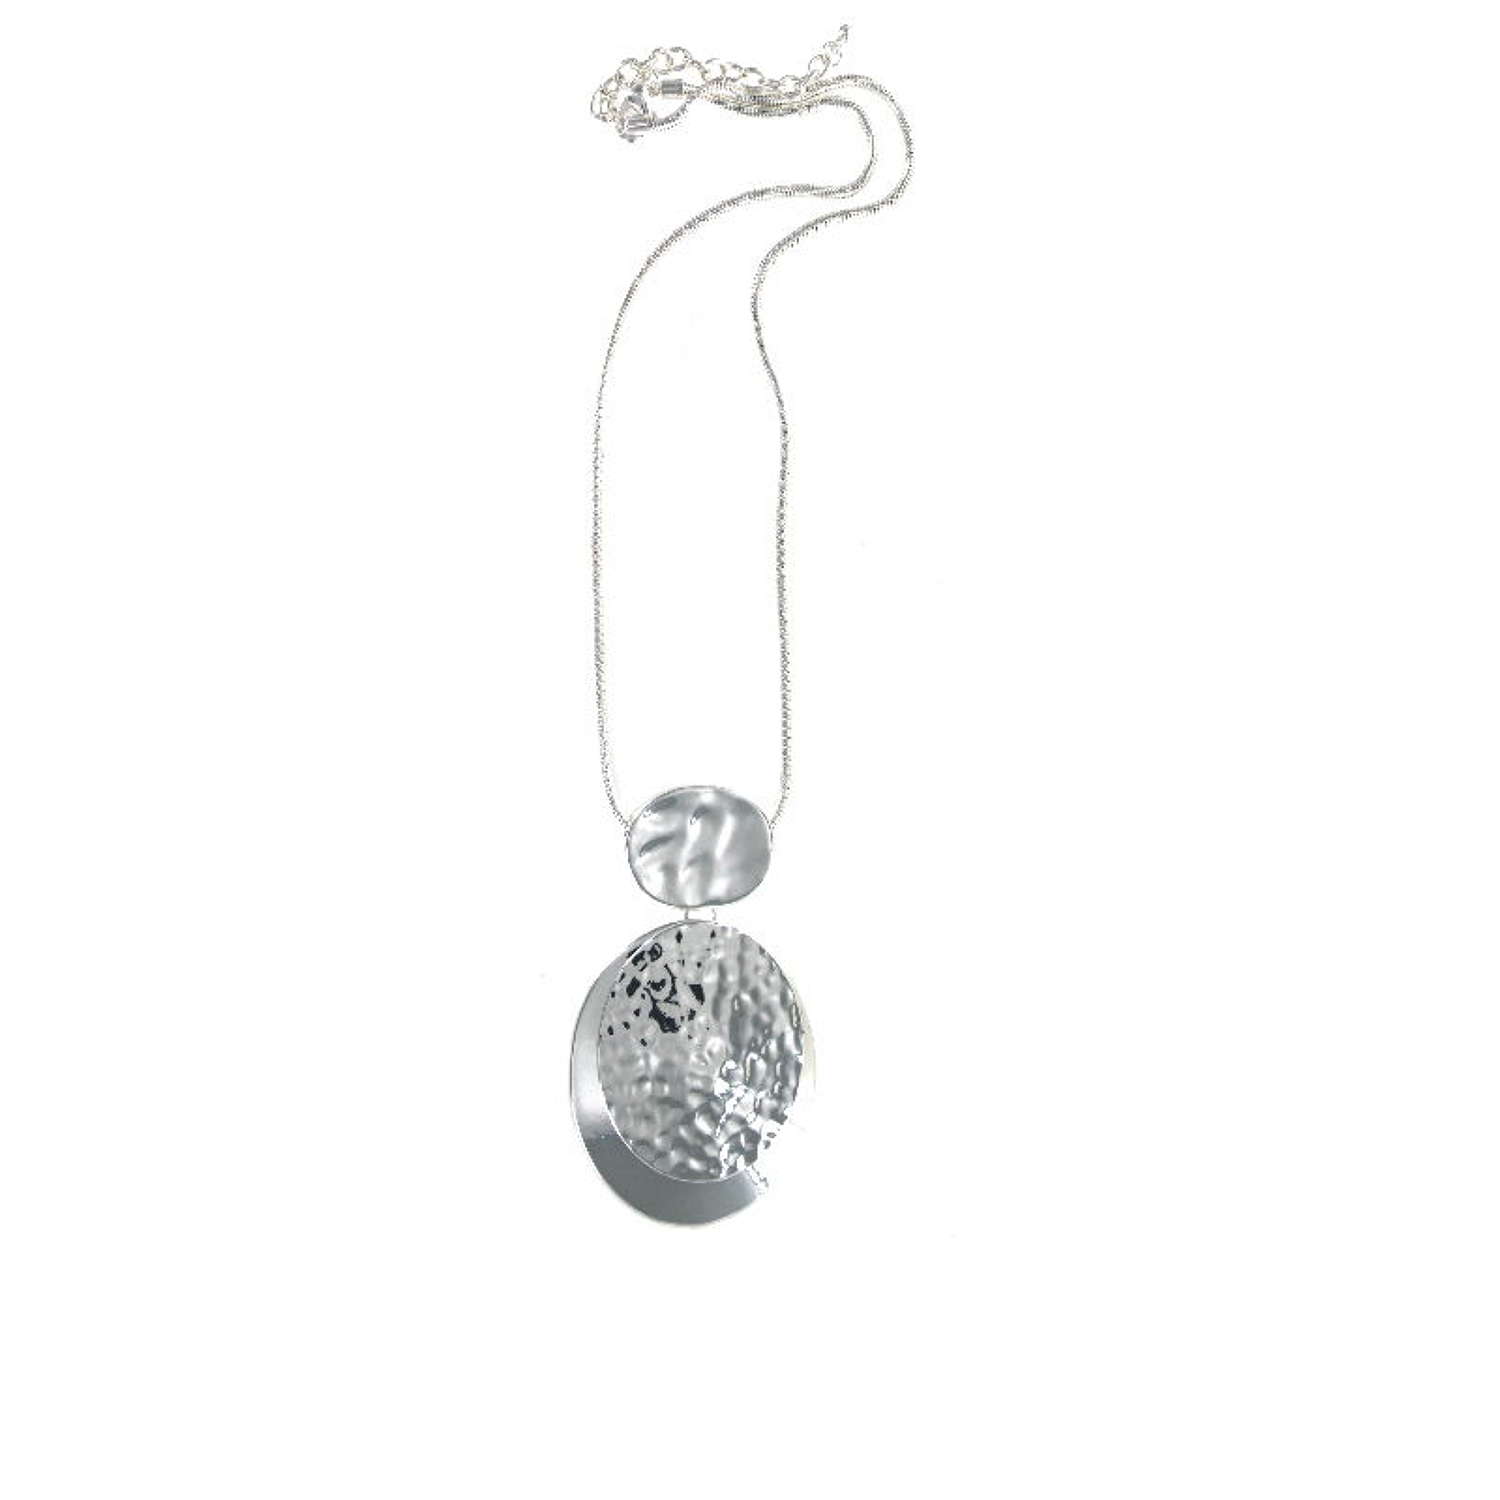 Silver tone hammered effect necklace.